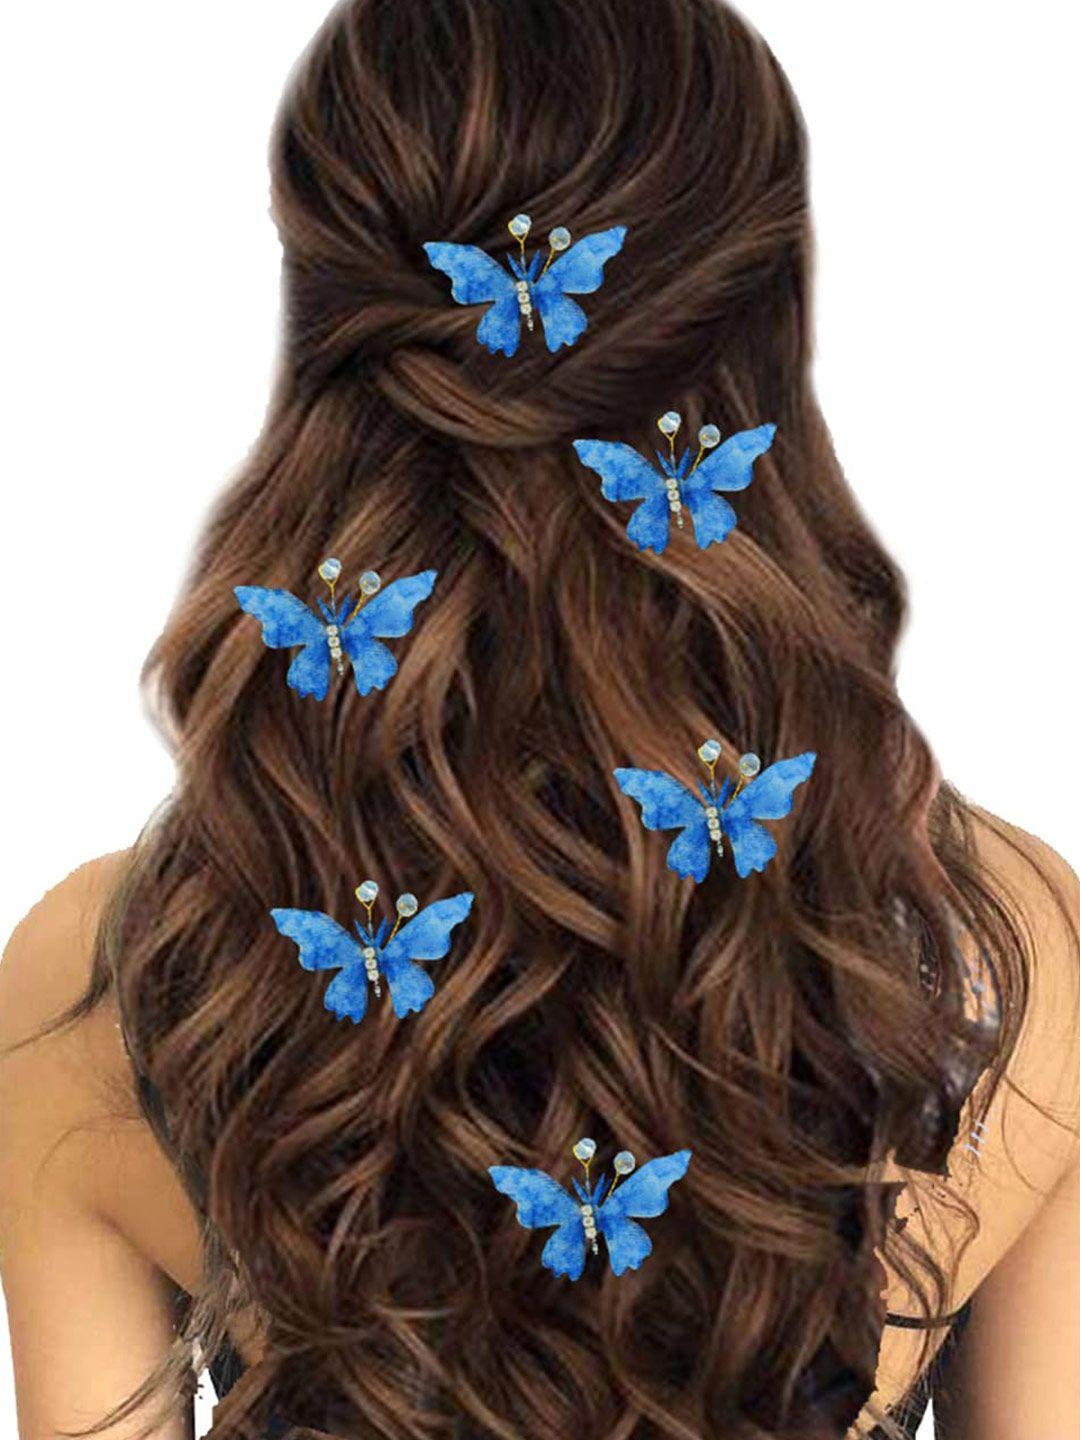 hair flare women set of 6 artificial butterfly design with stone flower hair accessory